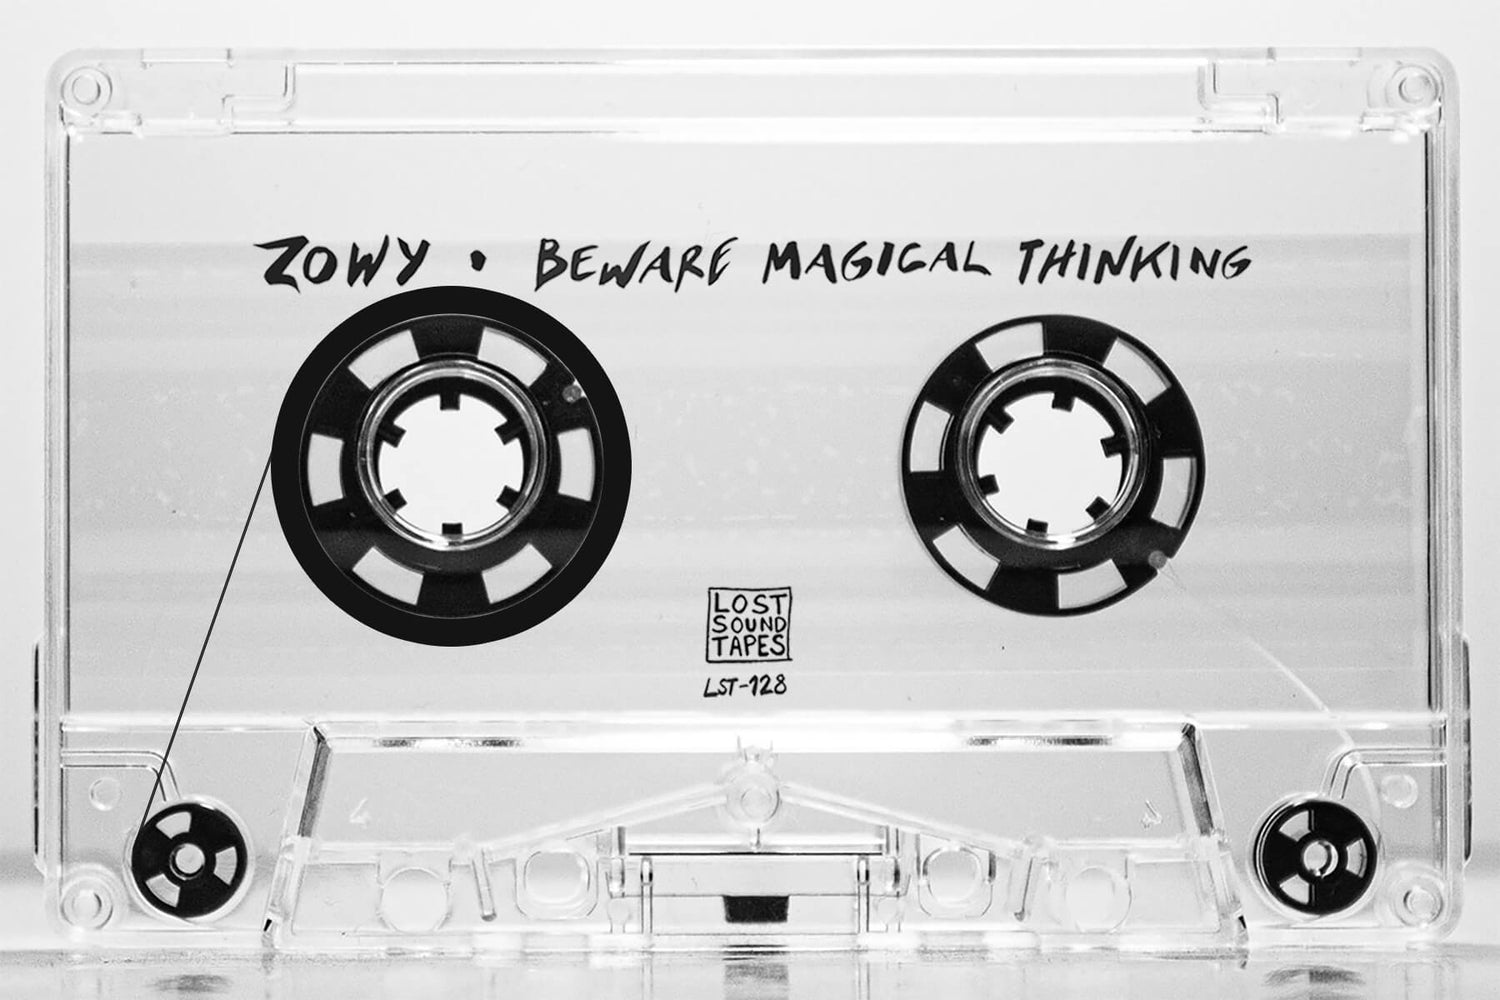 Zowy "Beware Magical Thinking" clear cassette tape with imprinting